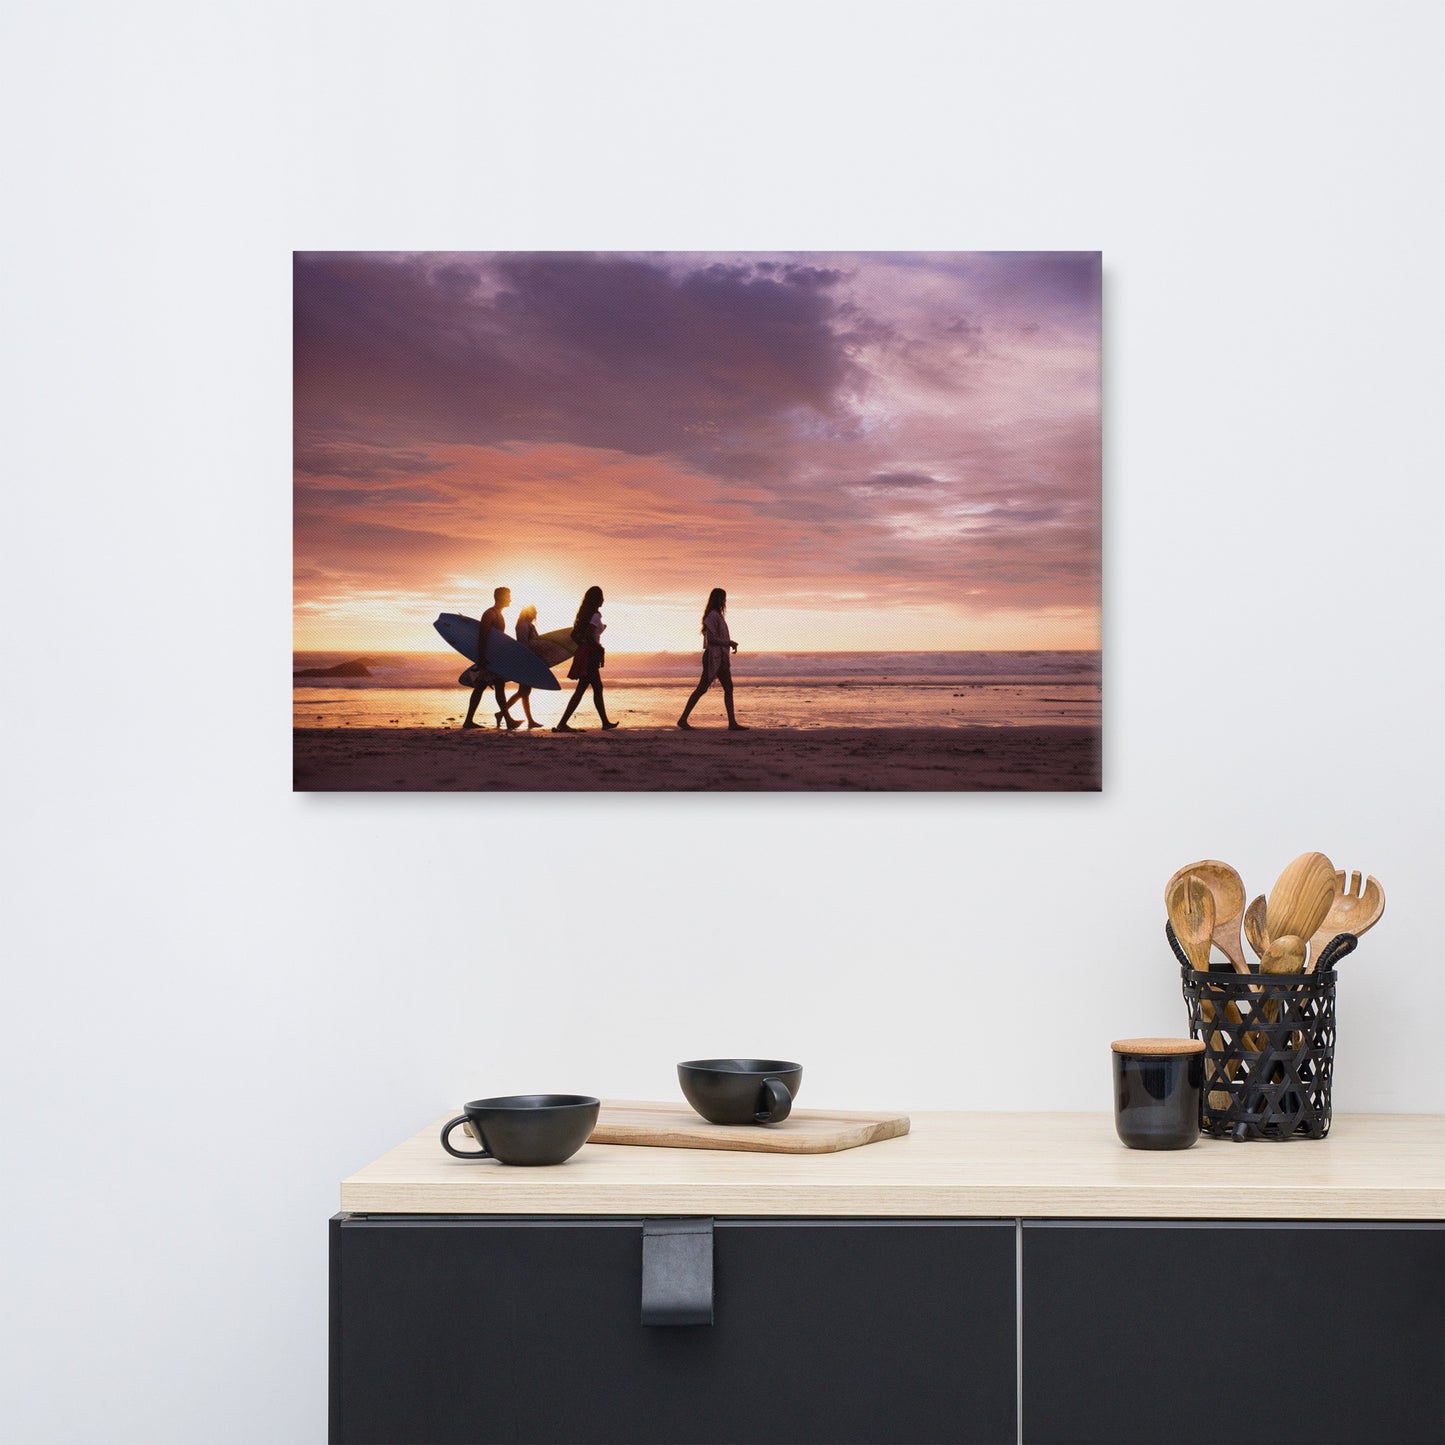 Surfers and Sunset on the Shore Coastal Landscape Lifestyle Photograph Canvas Wall Art Print